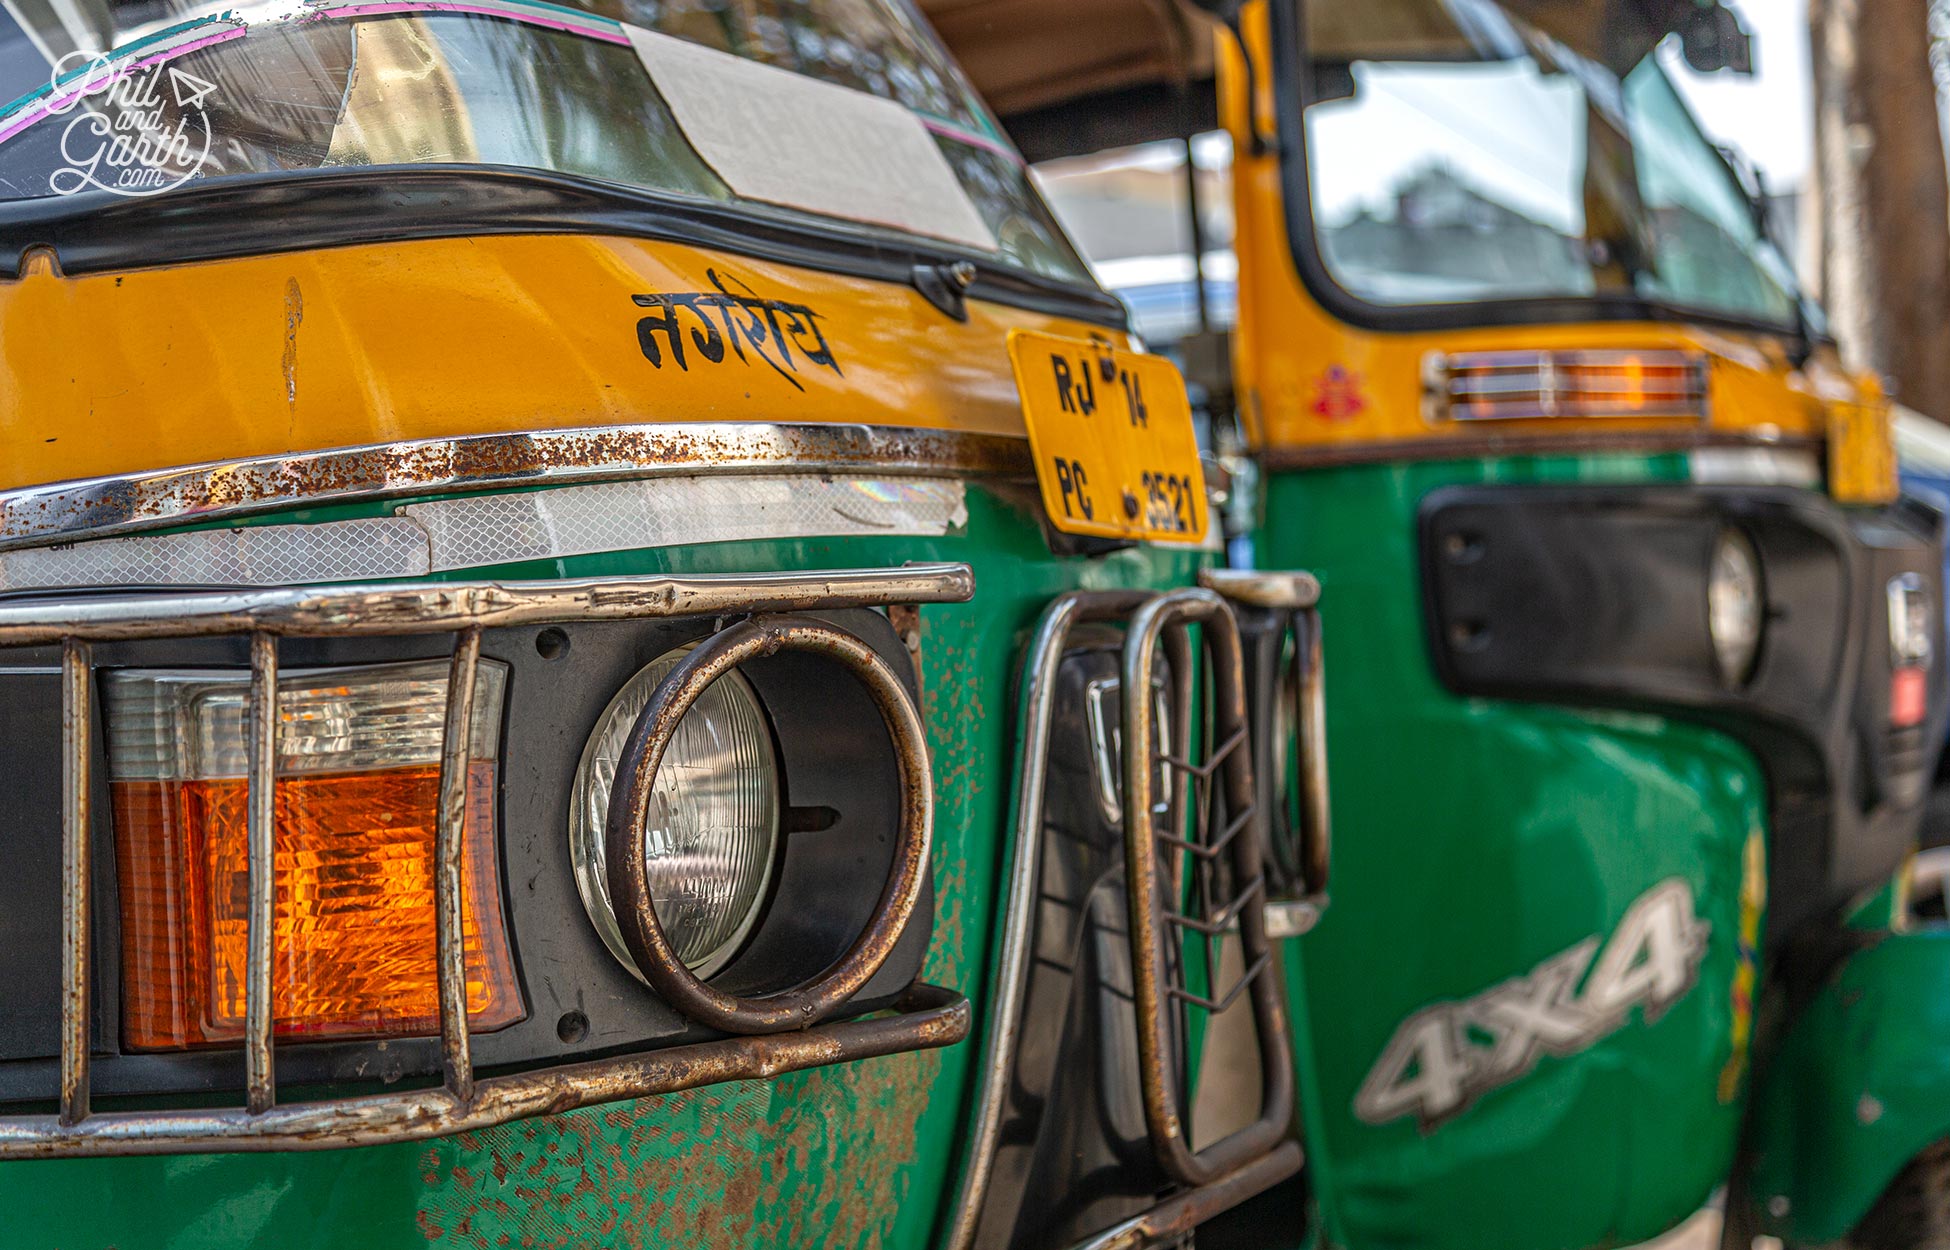 Tuk tuks are by far the easiest way to get around Jaipur